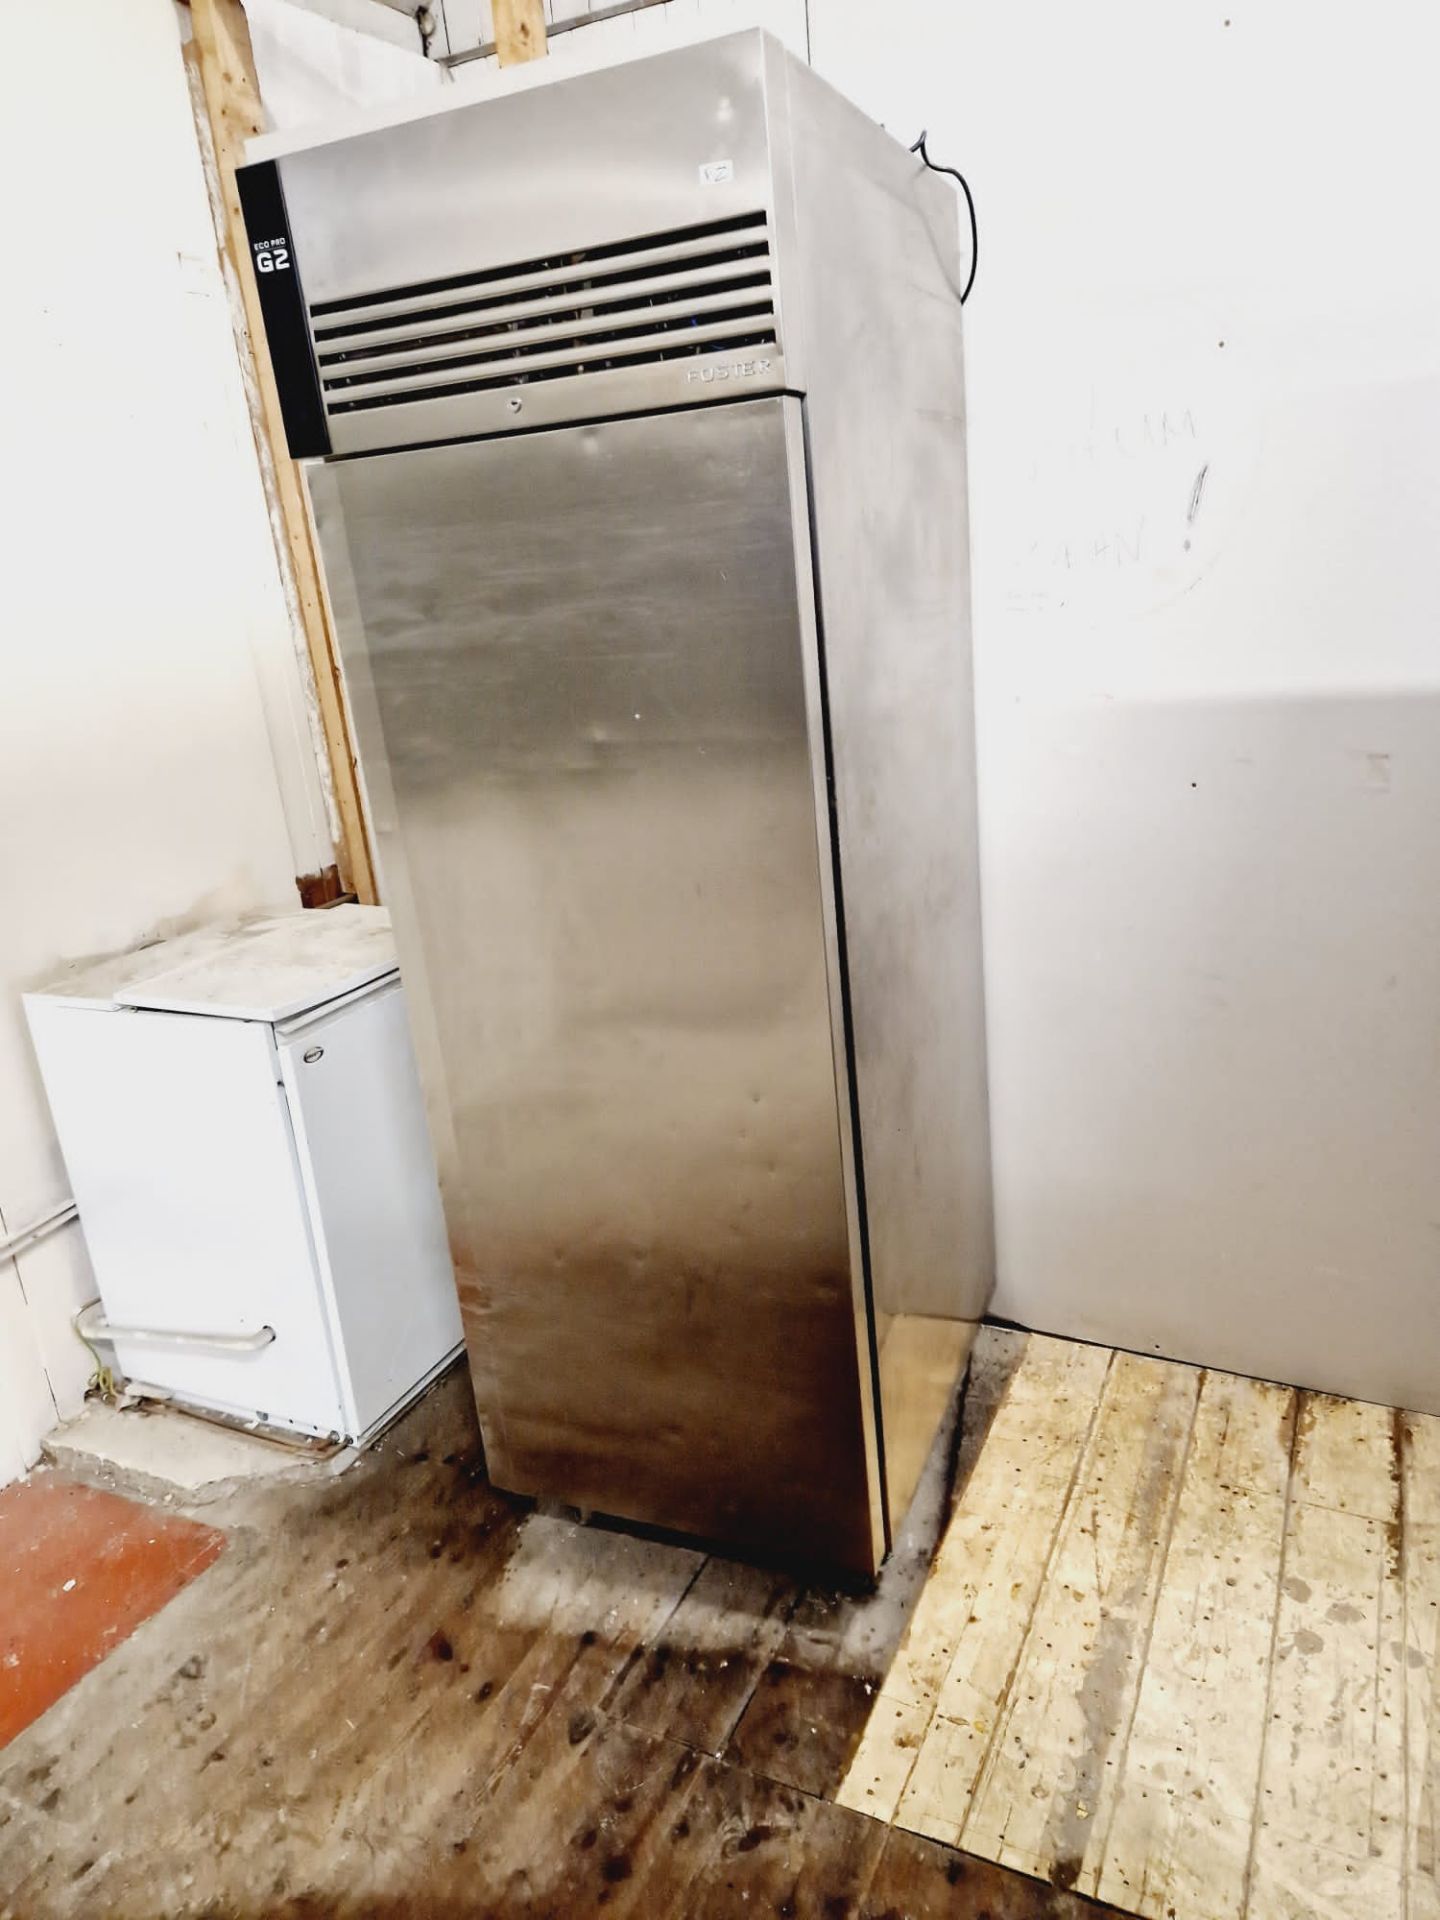 FOSTER G2 SINGLE DOOR FRIDGE FULLY REFURBISHED  AND SERVICED